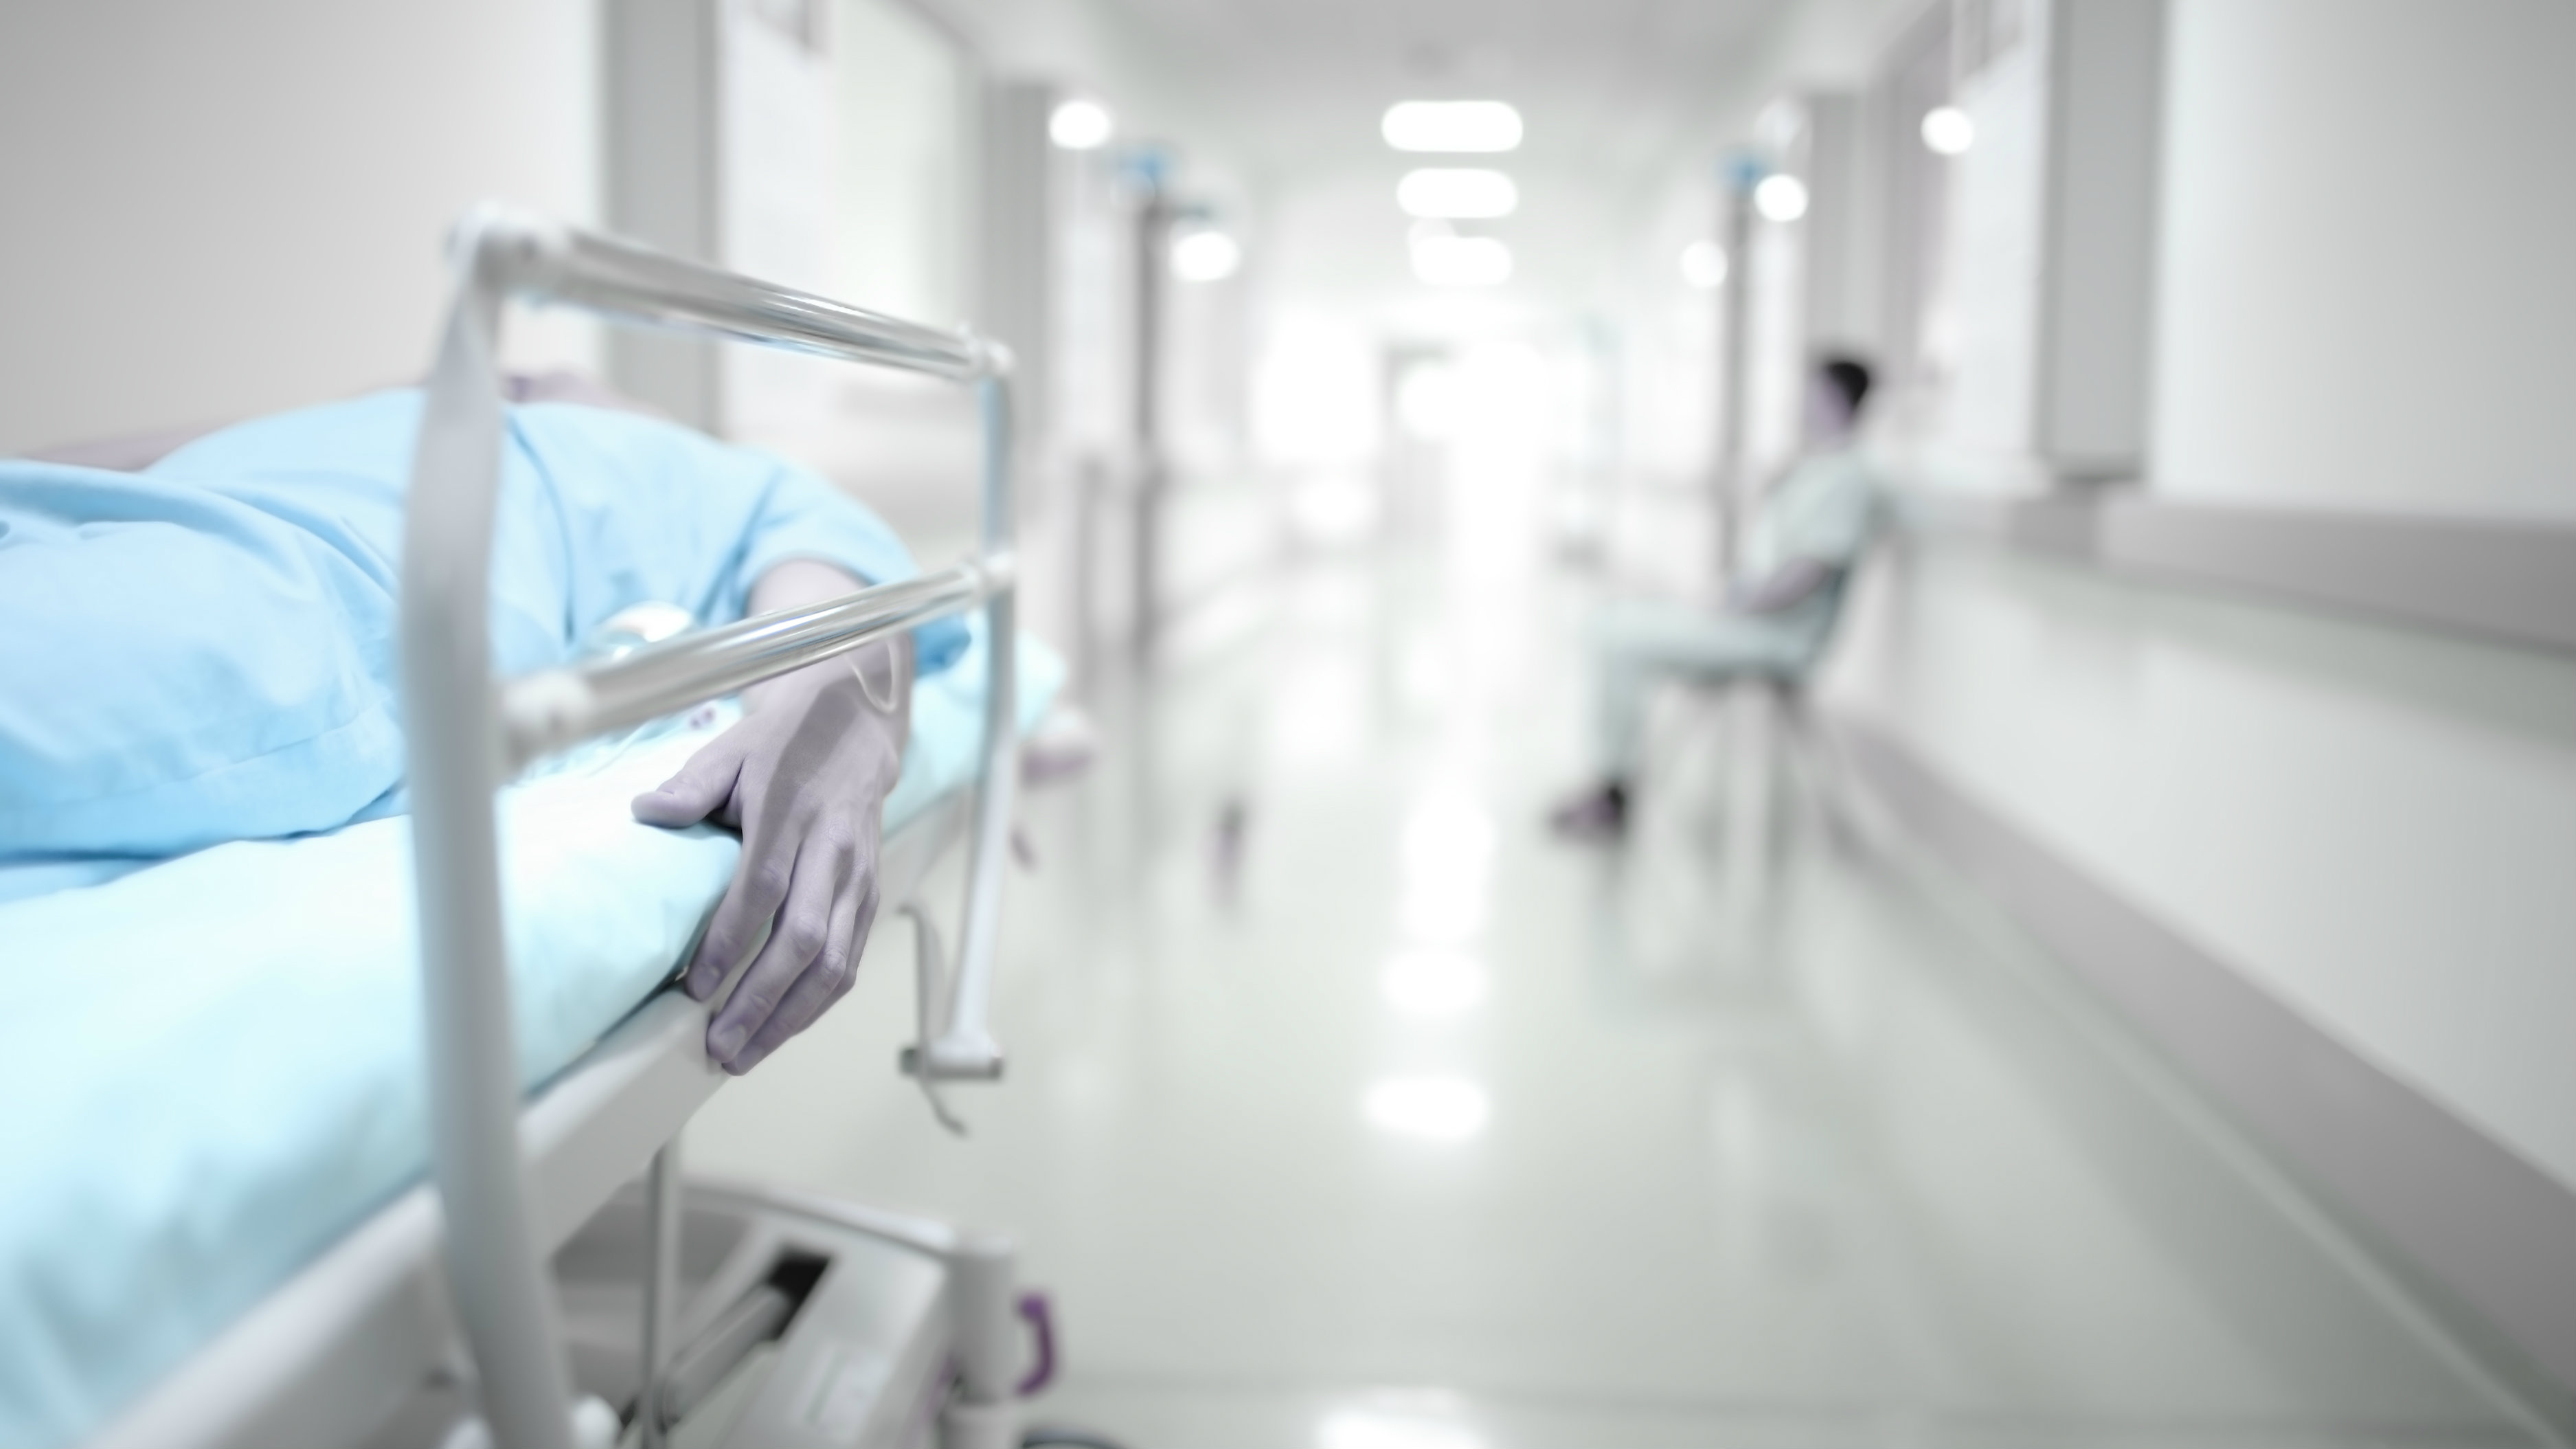 Ten Lessons from a Hospital Bed Desiring